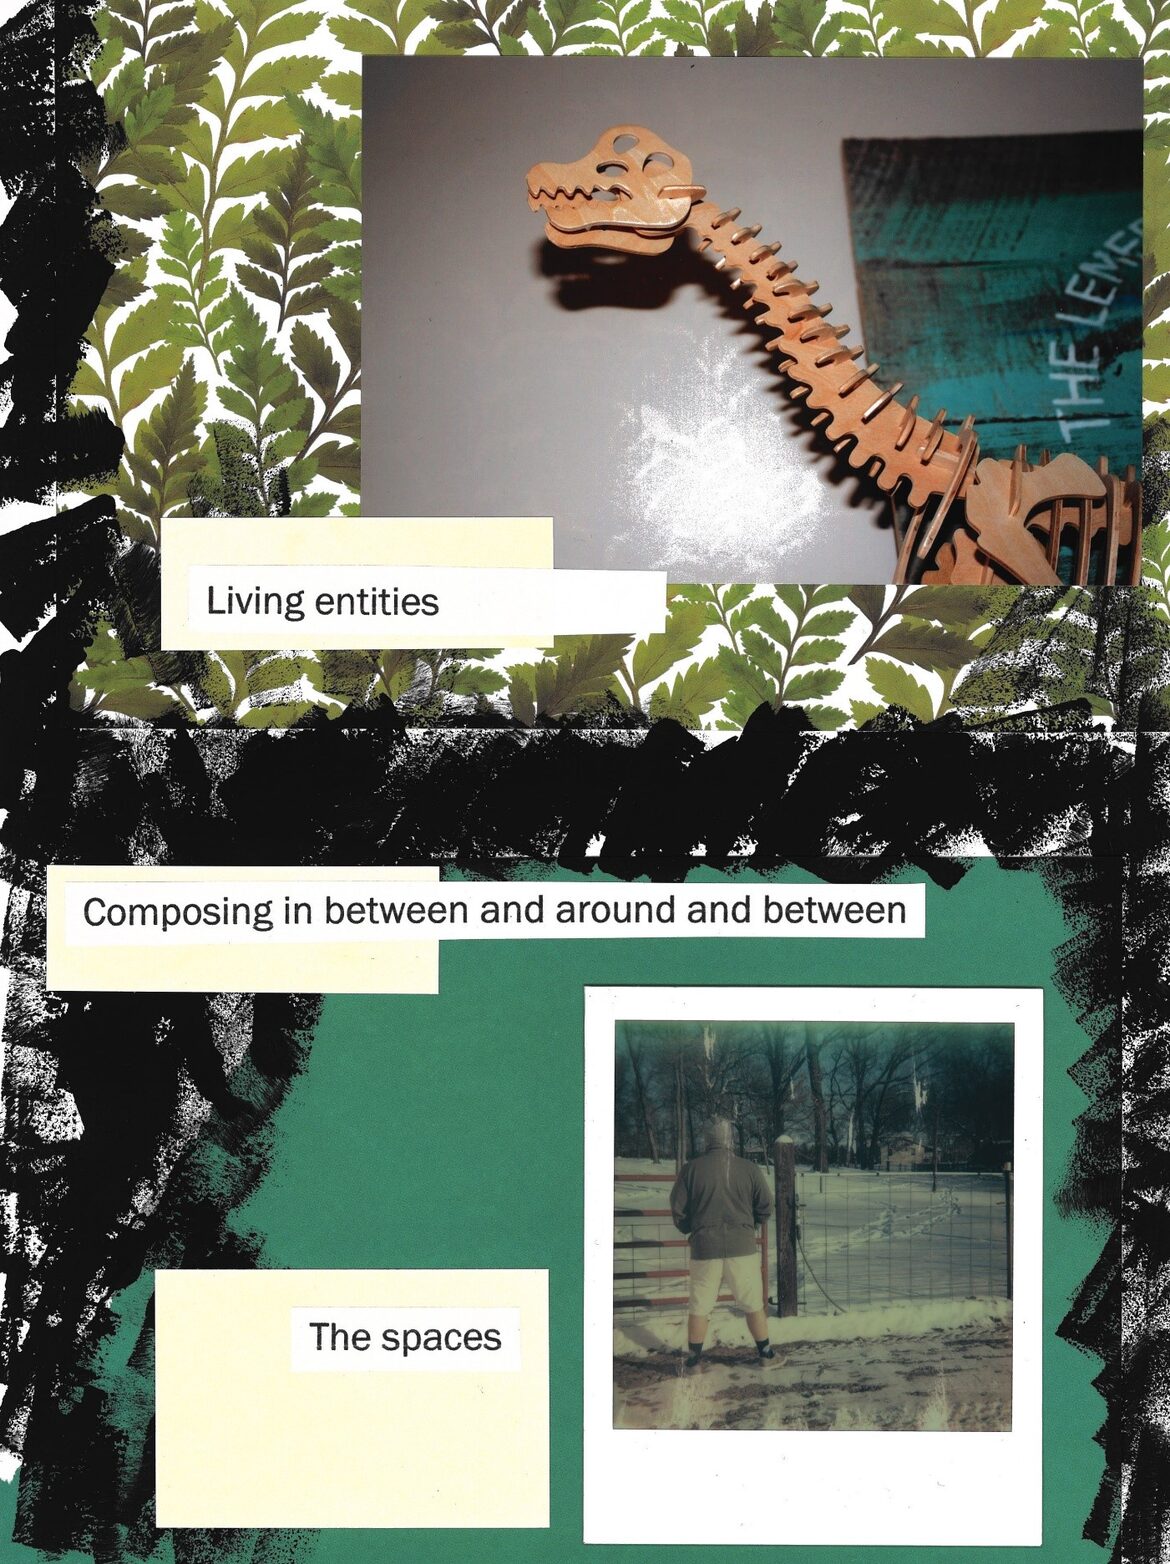 A collage with a background of leaves and green and black paint overlaid with images of a wooden dinosaur skeleton and a Polaroid of a person. 